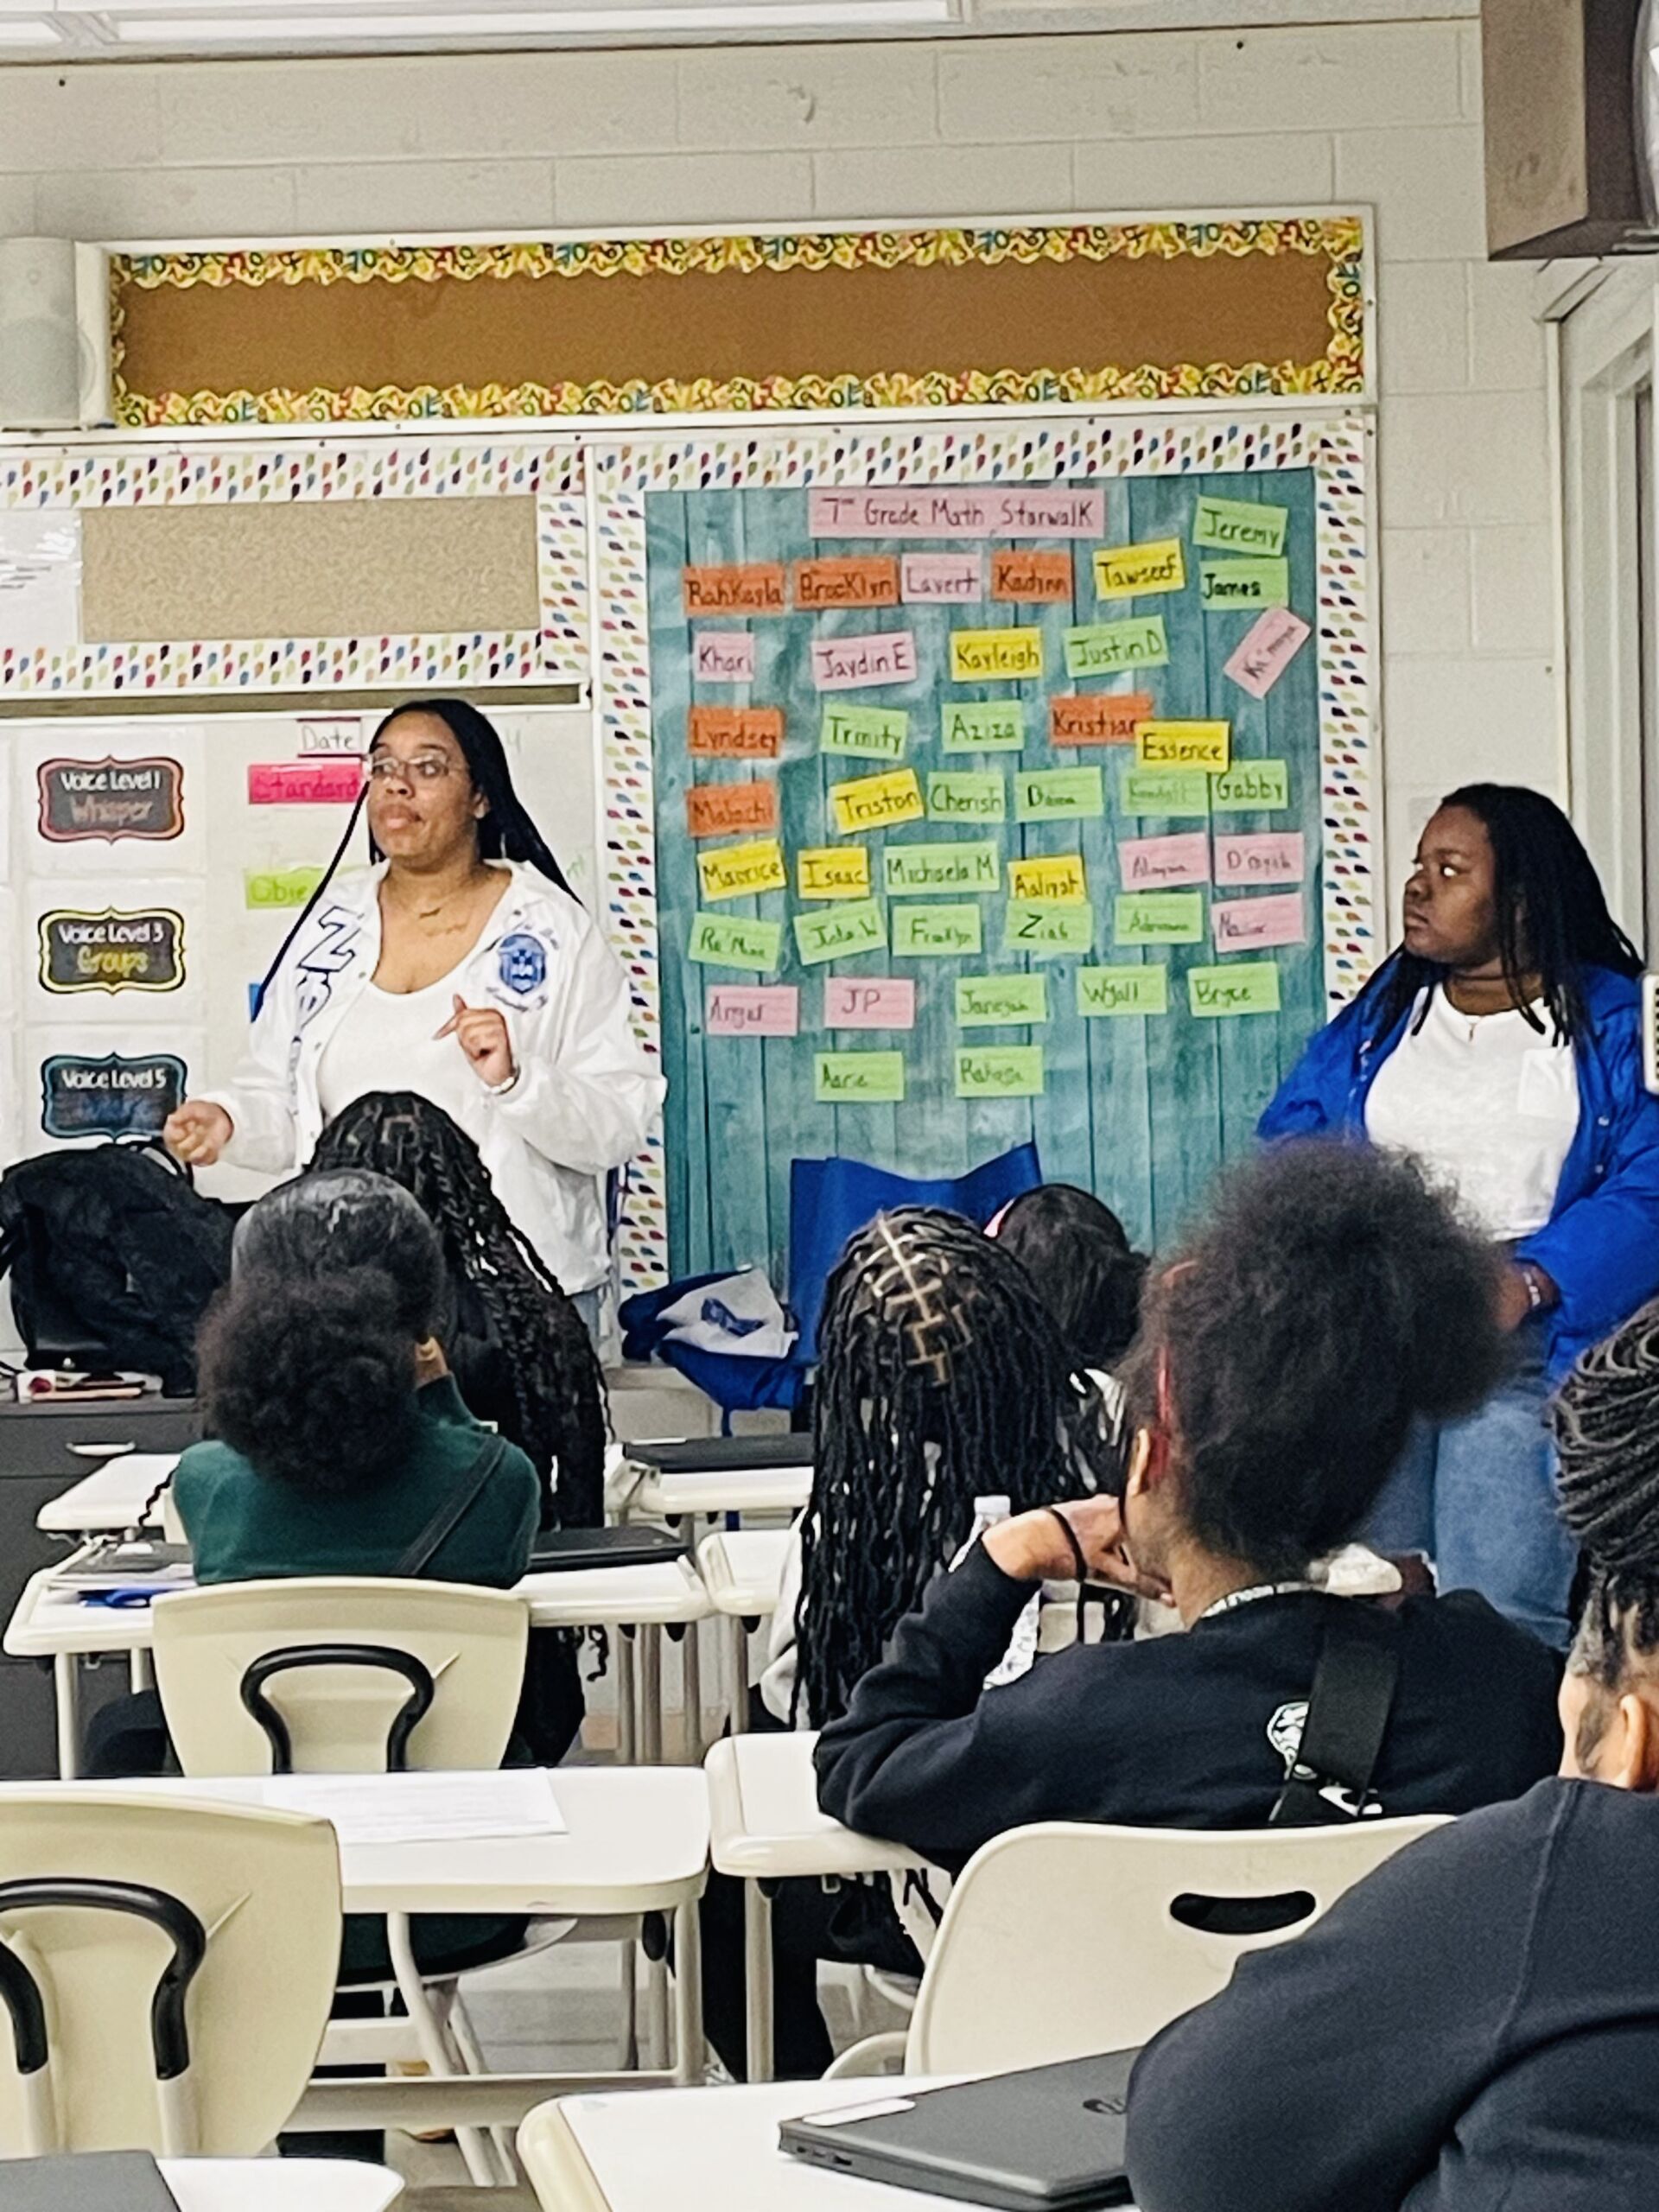 Two young Black women stand at the front of a middle school classroom. They are wearing blue and white Zeta Phi Beta sorority swag.